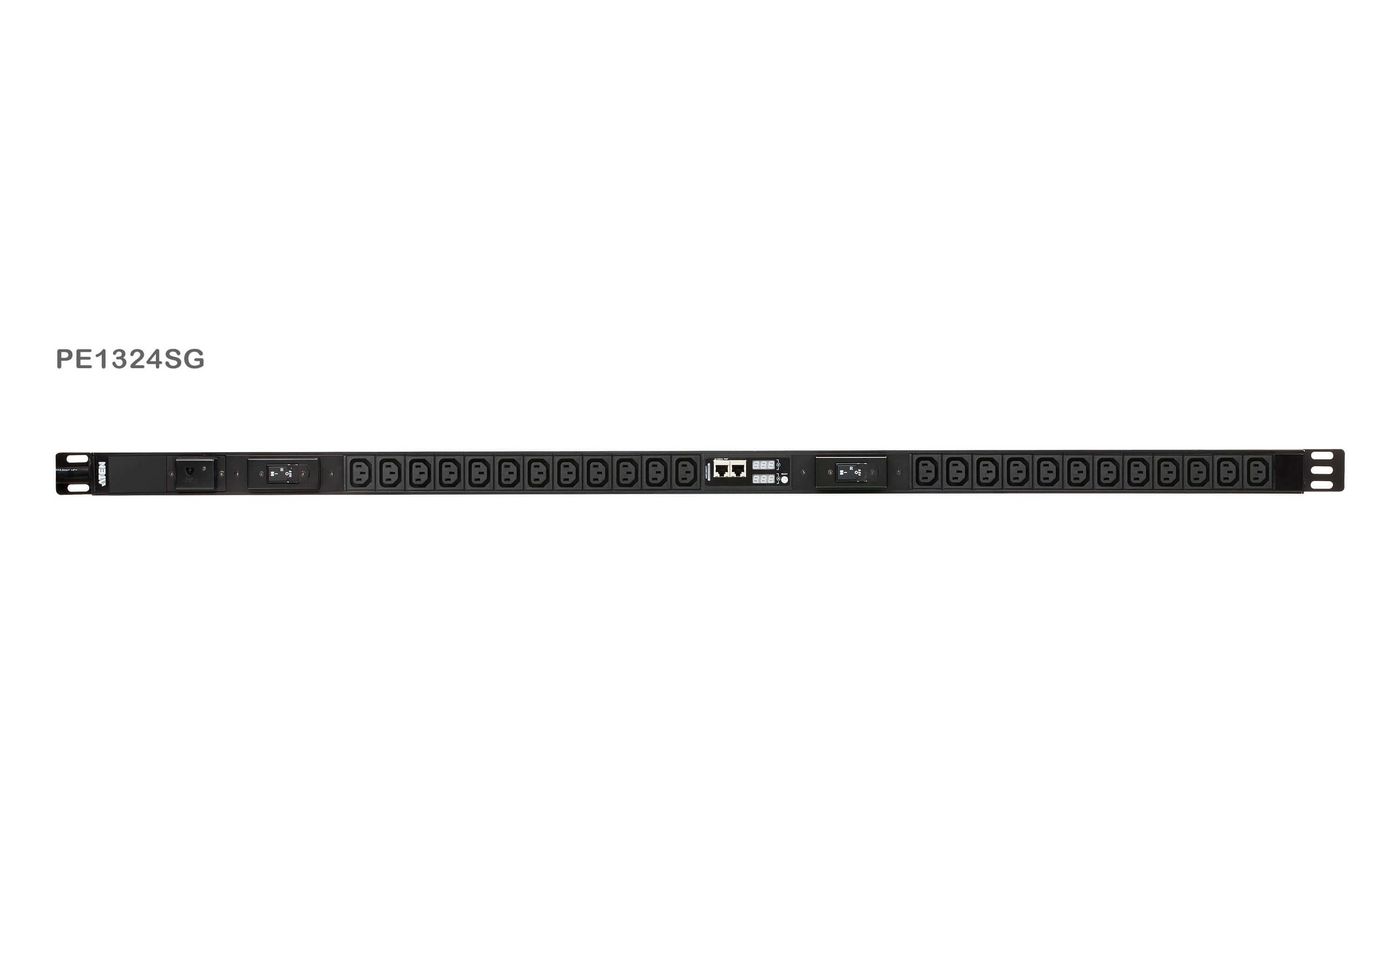 Aten PE1324SG-AT W127285141 24-Outlet 0U PDU with Current 